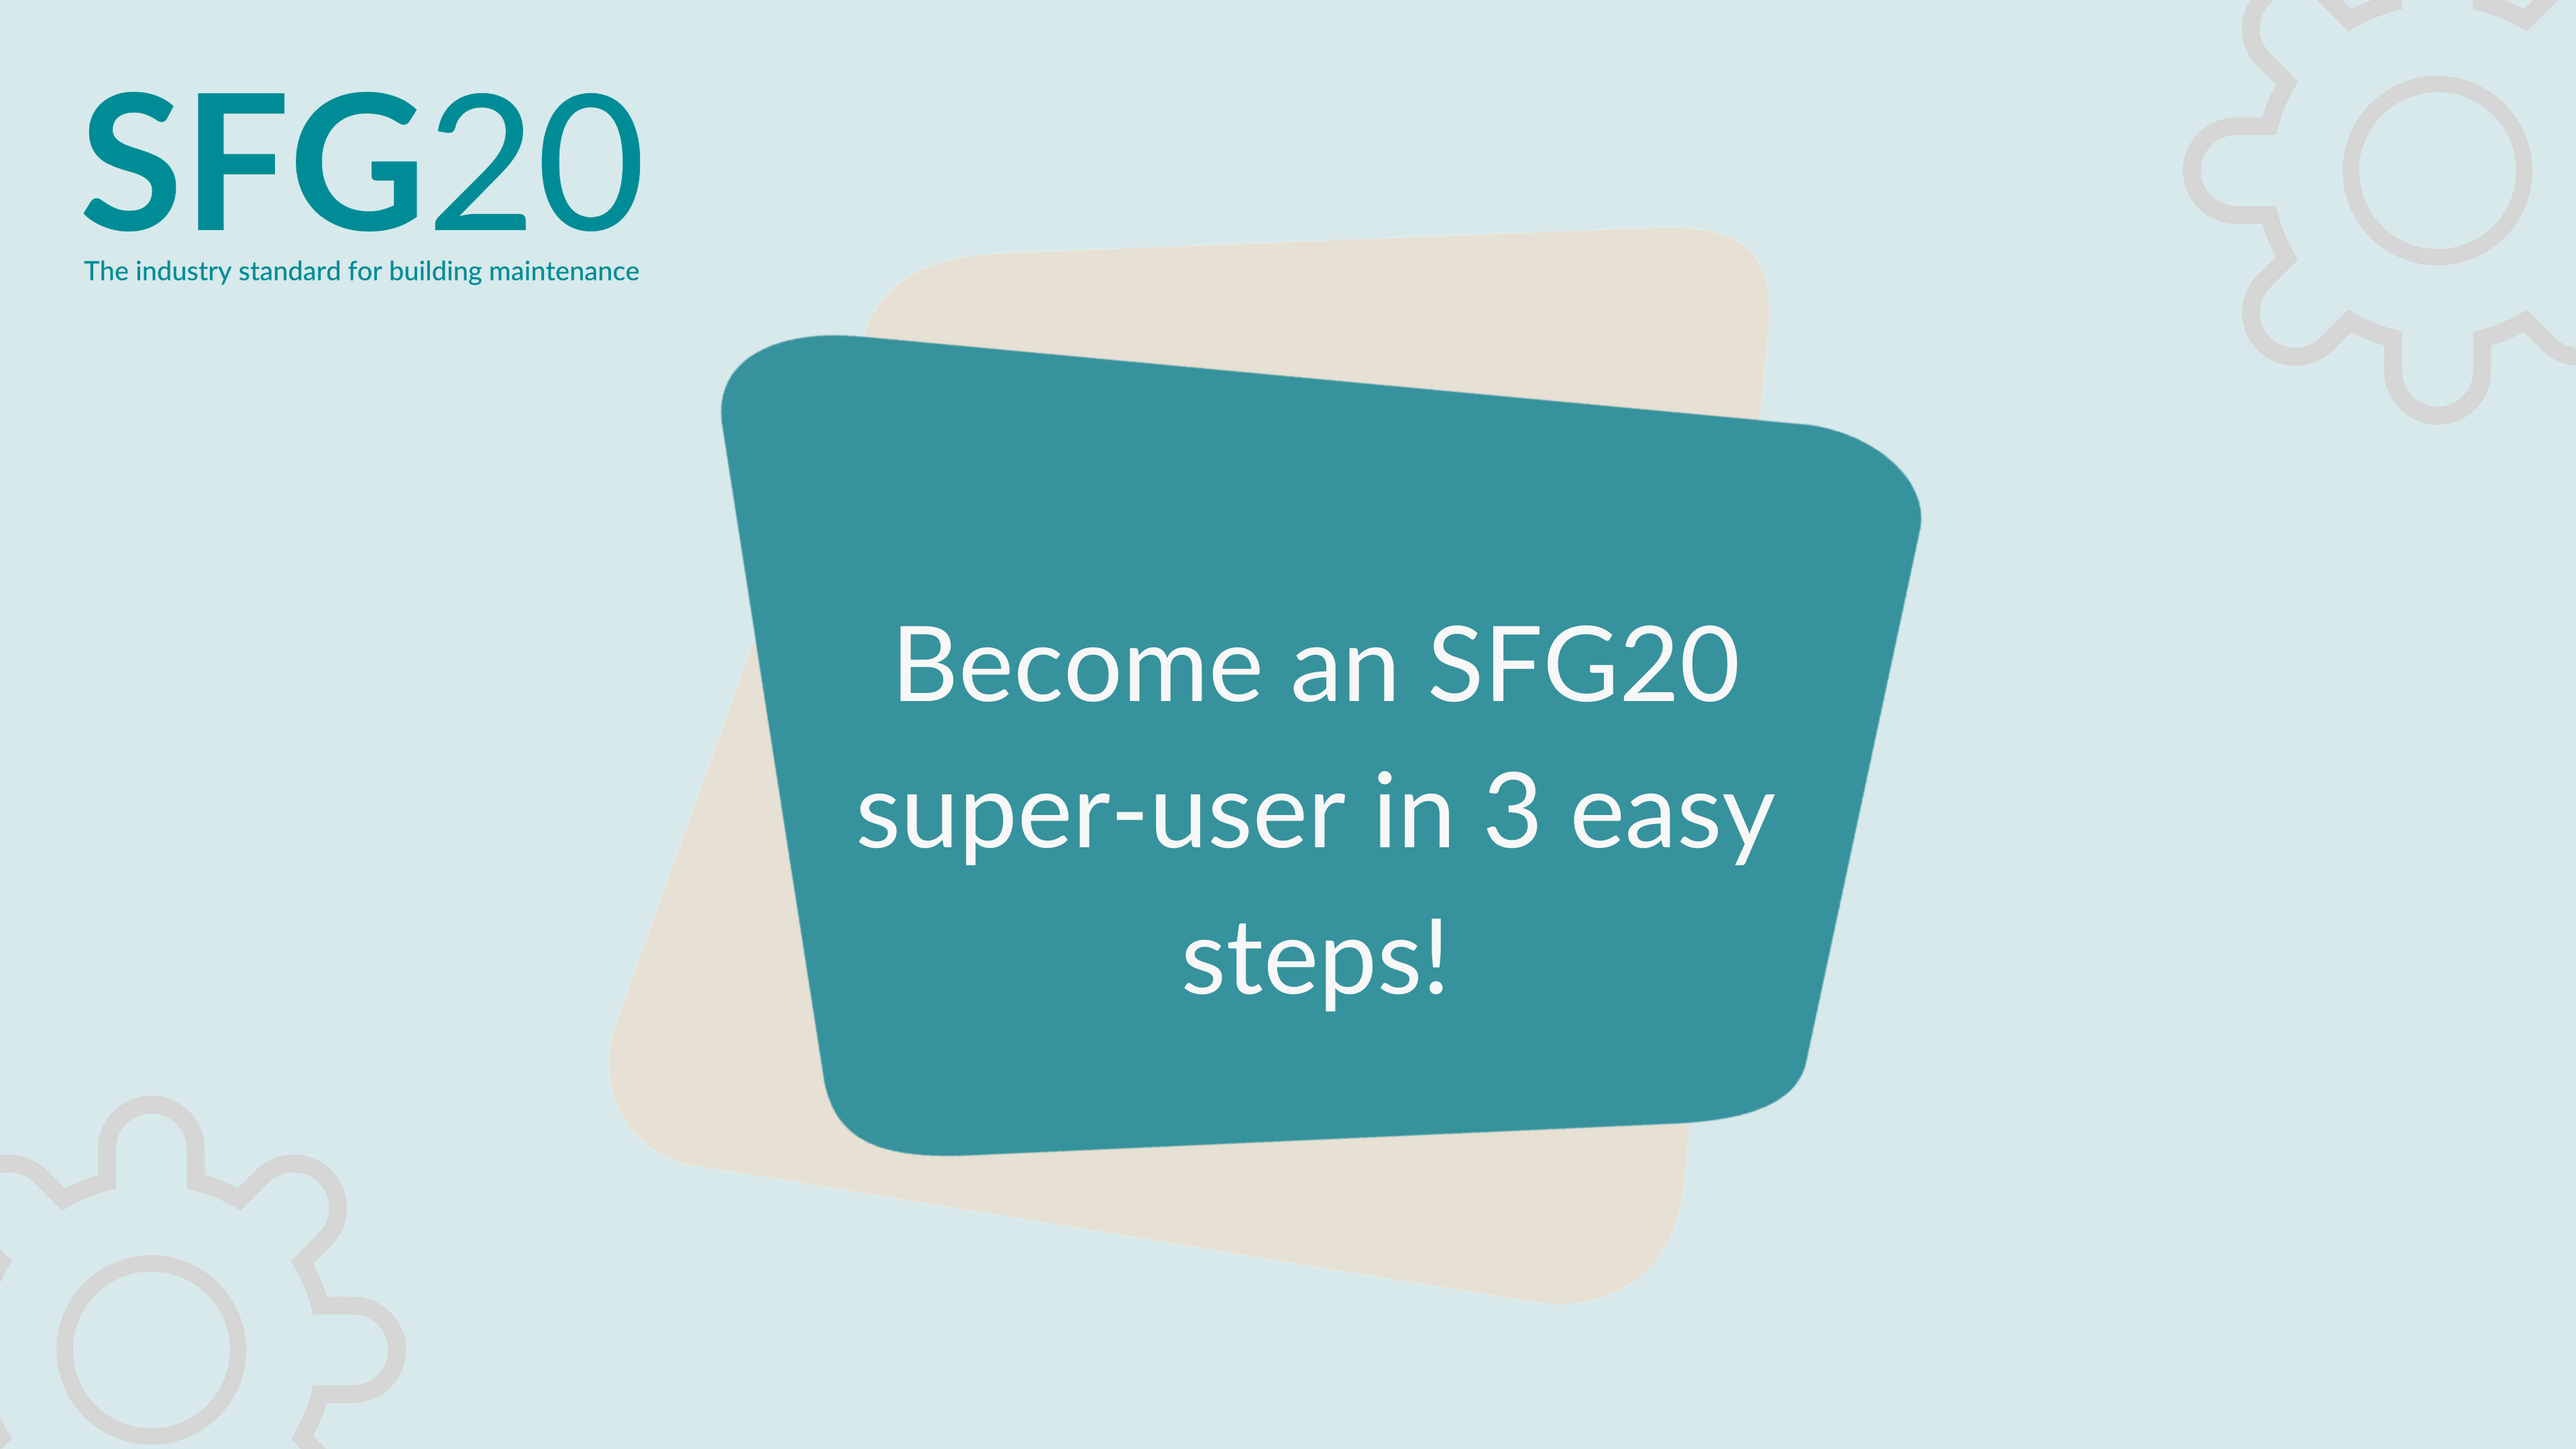 Become an SFG20 super-user in 3 steps